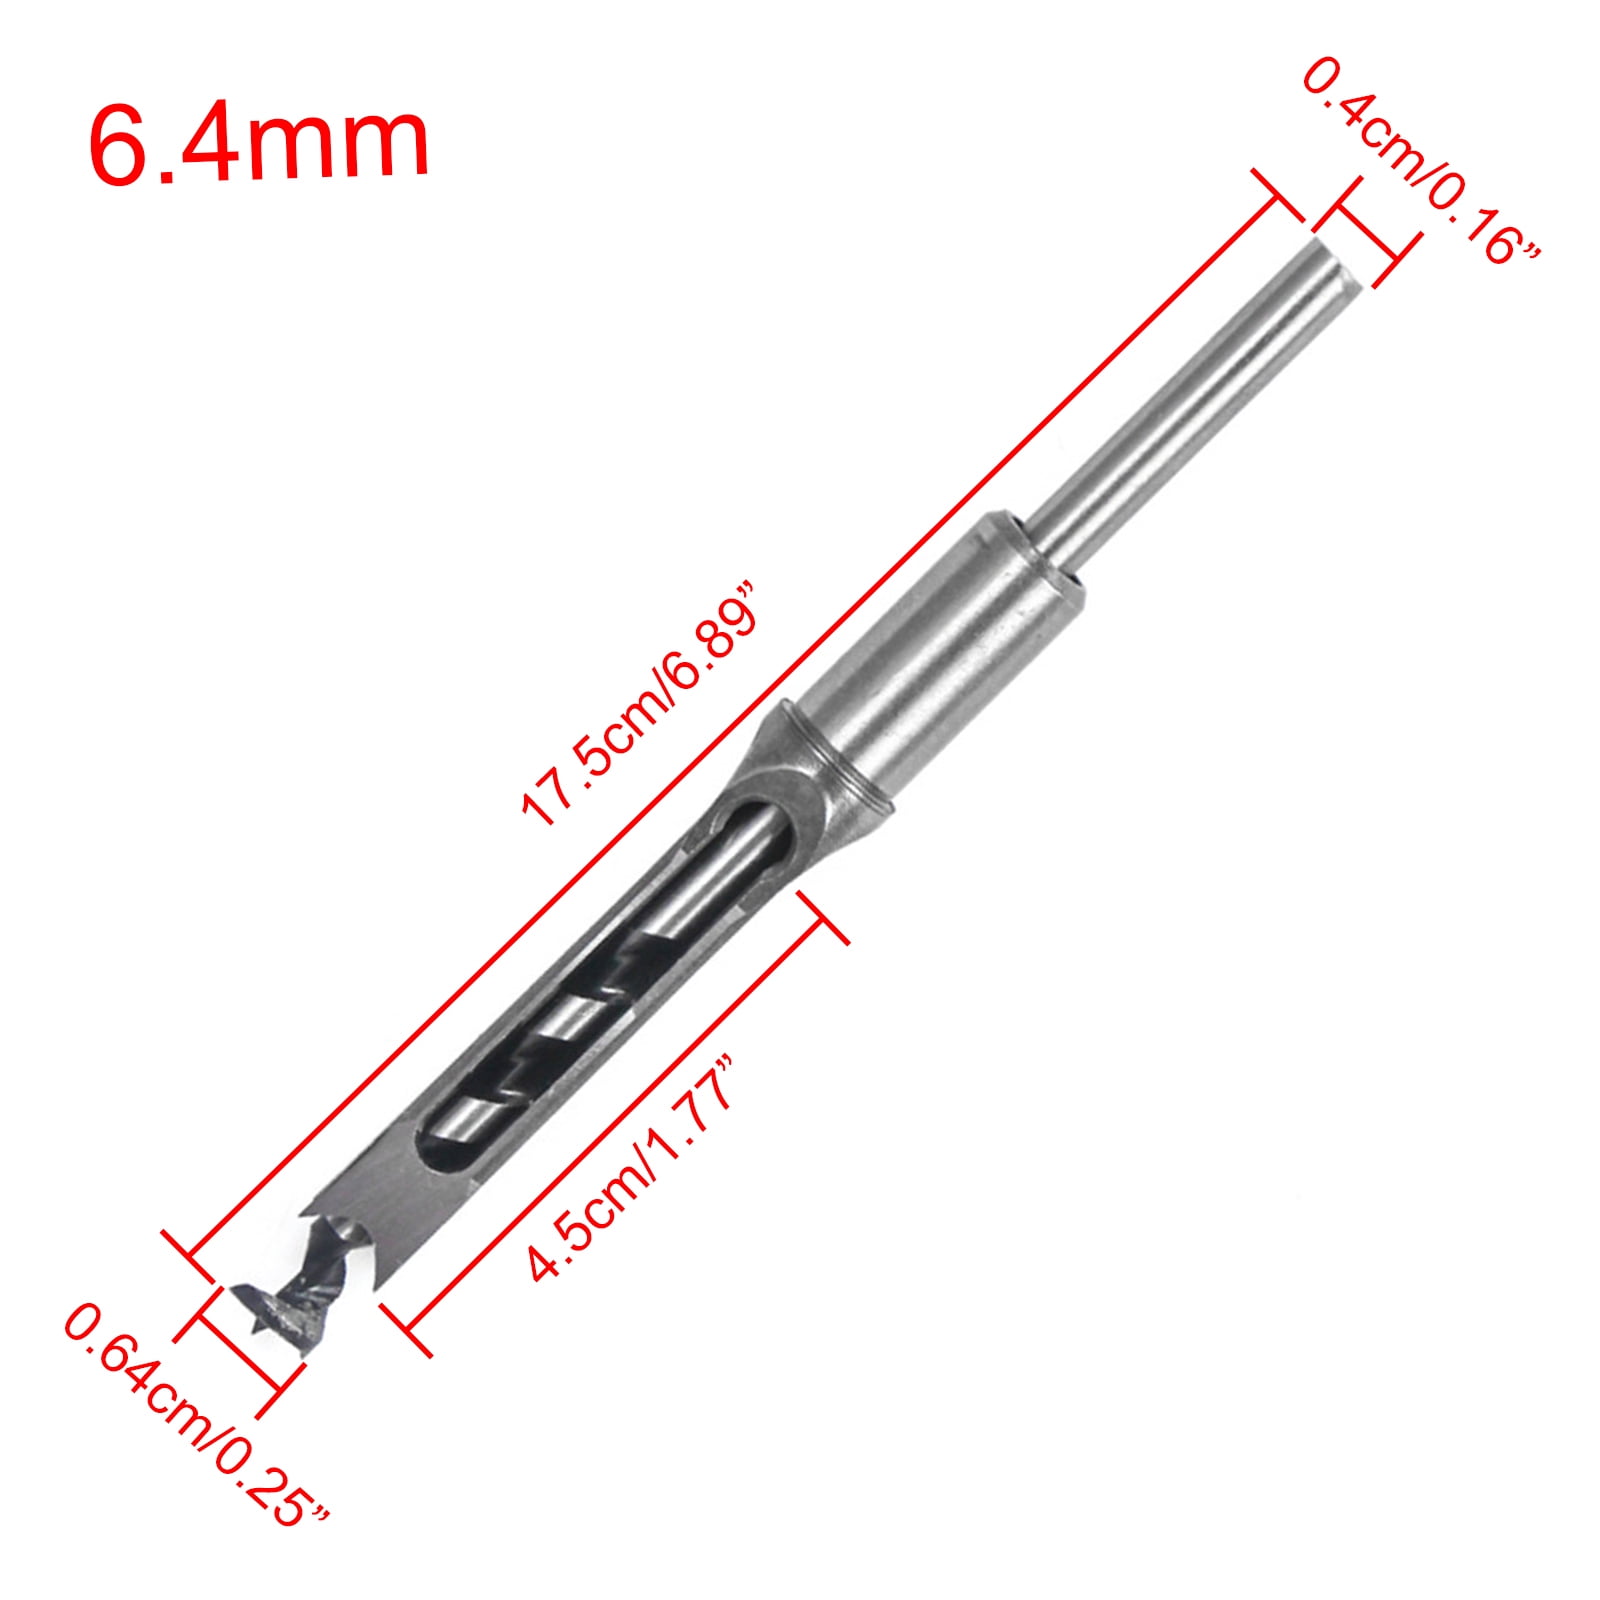 Square Hole Saw Auger Drill Bit Set 6.4-16mm Mortising Chisel Carve Woodworking 